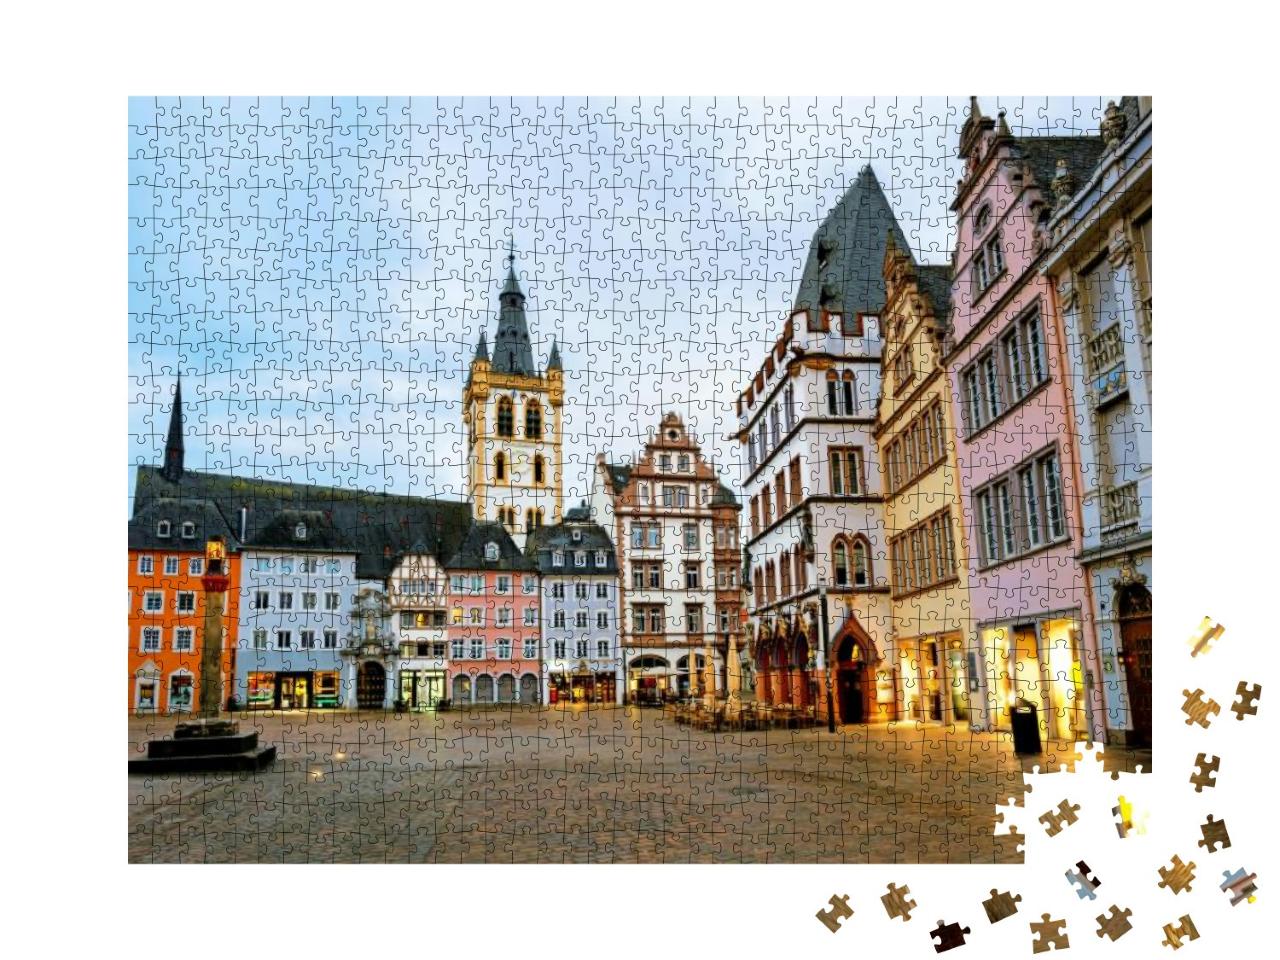 Historical Facades on the Main Market Square in the Old T... Jigsaw Puzzle with 1000 pieces